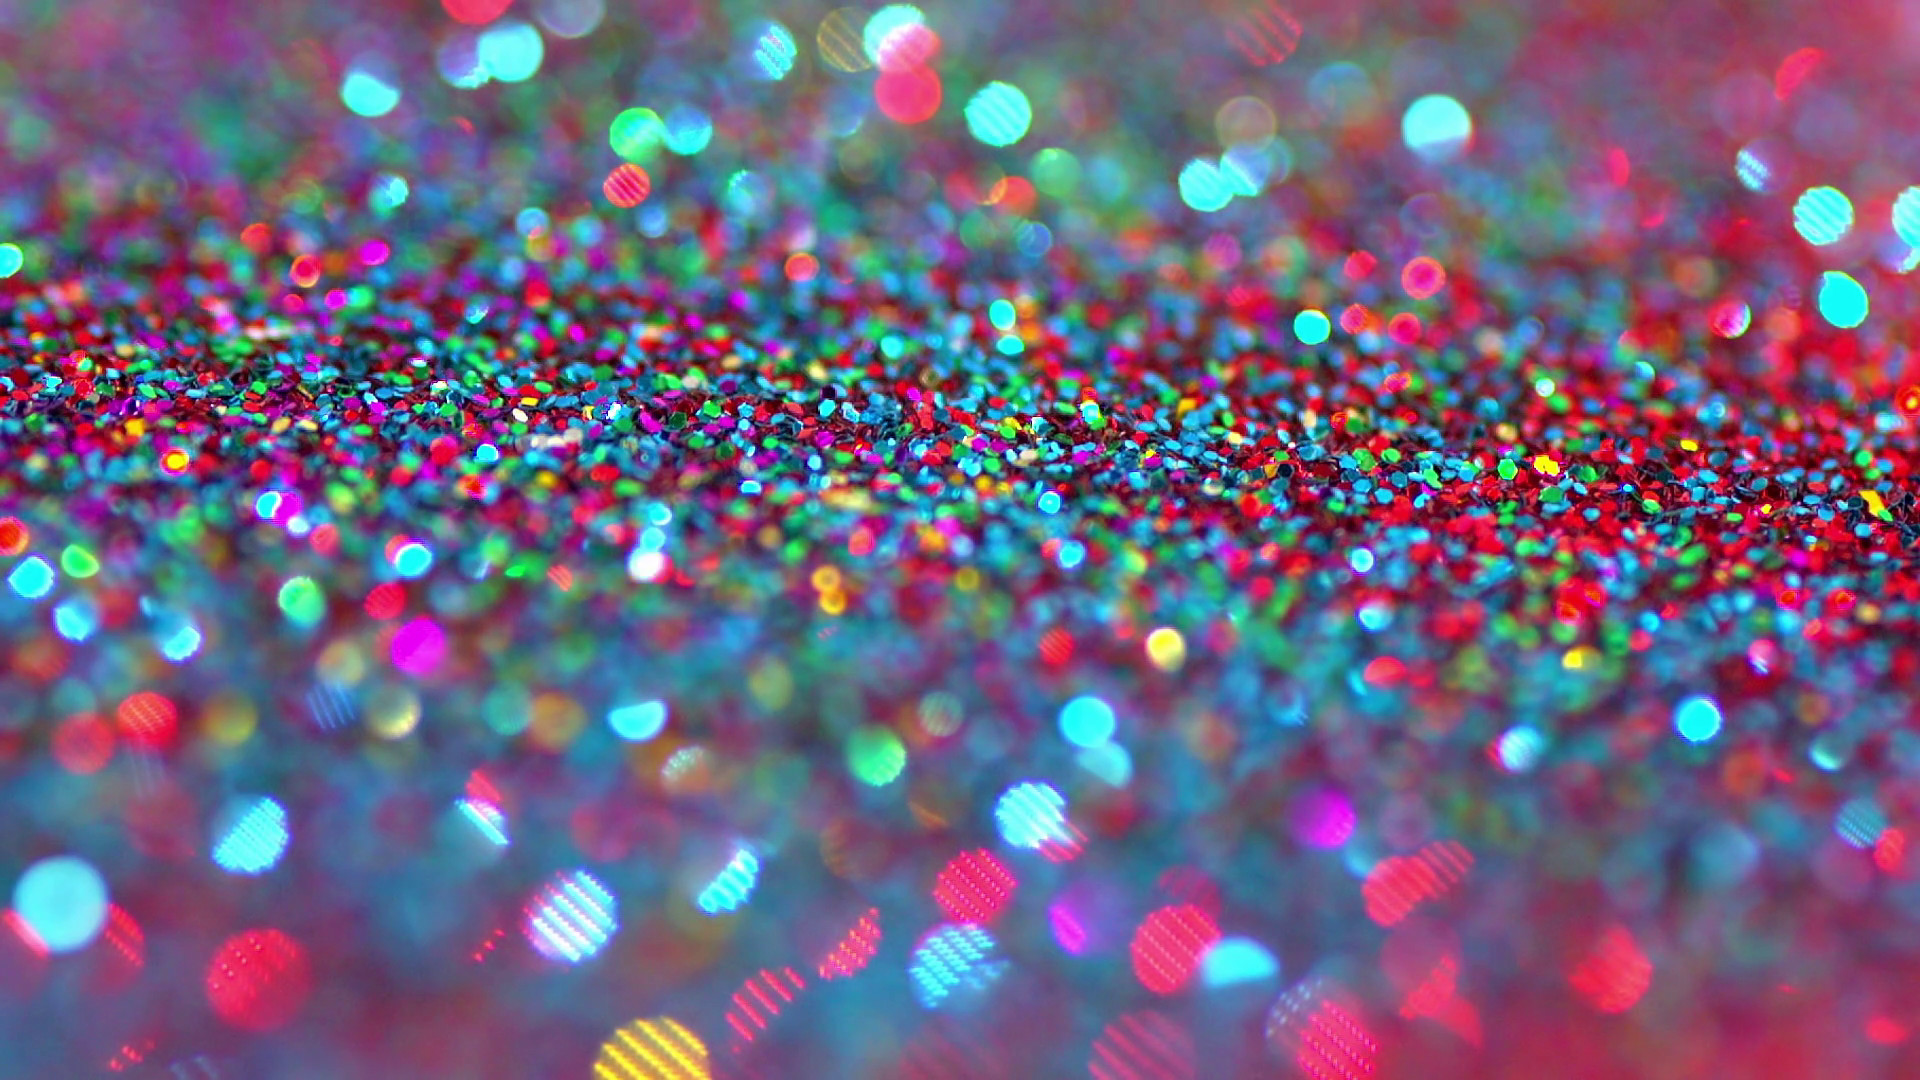 1920x1080 sparkly glitter background in bright colors great party background .